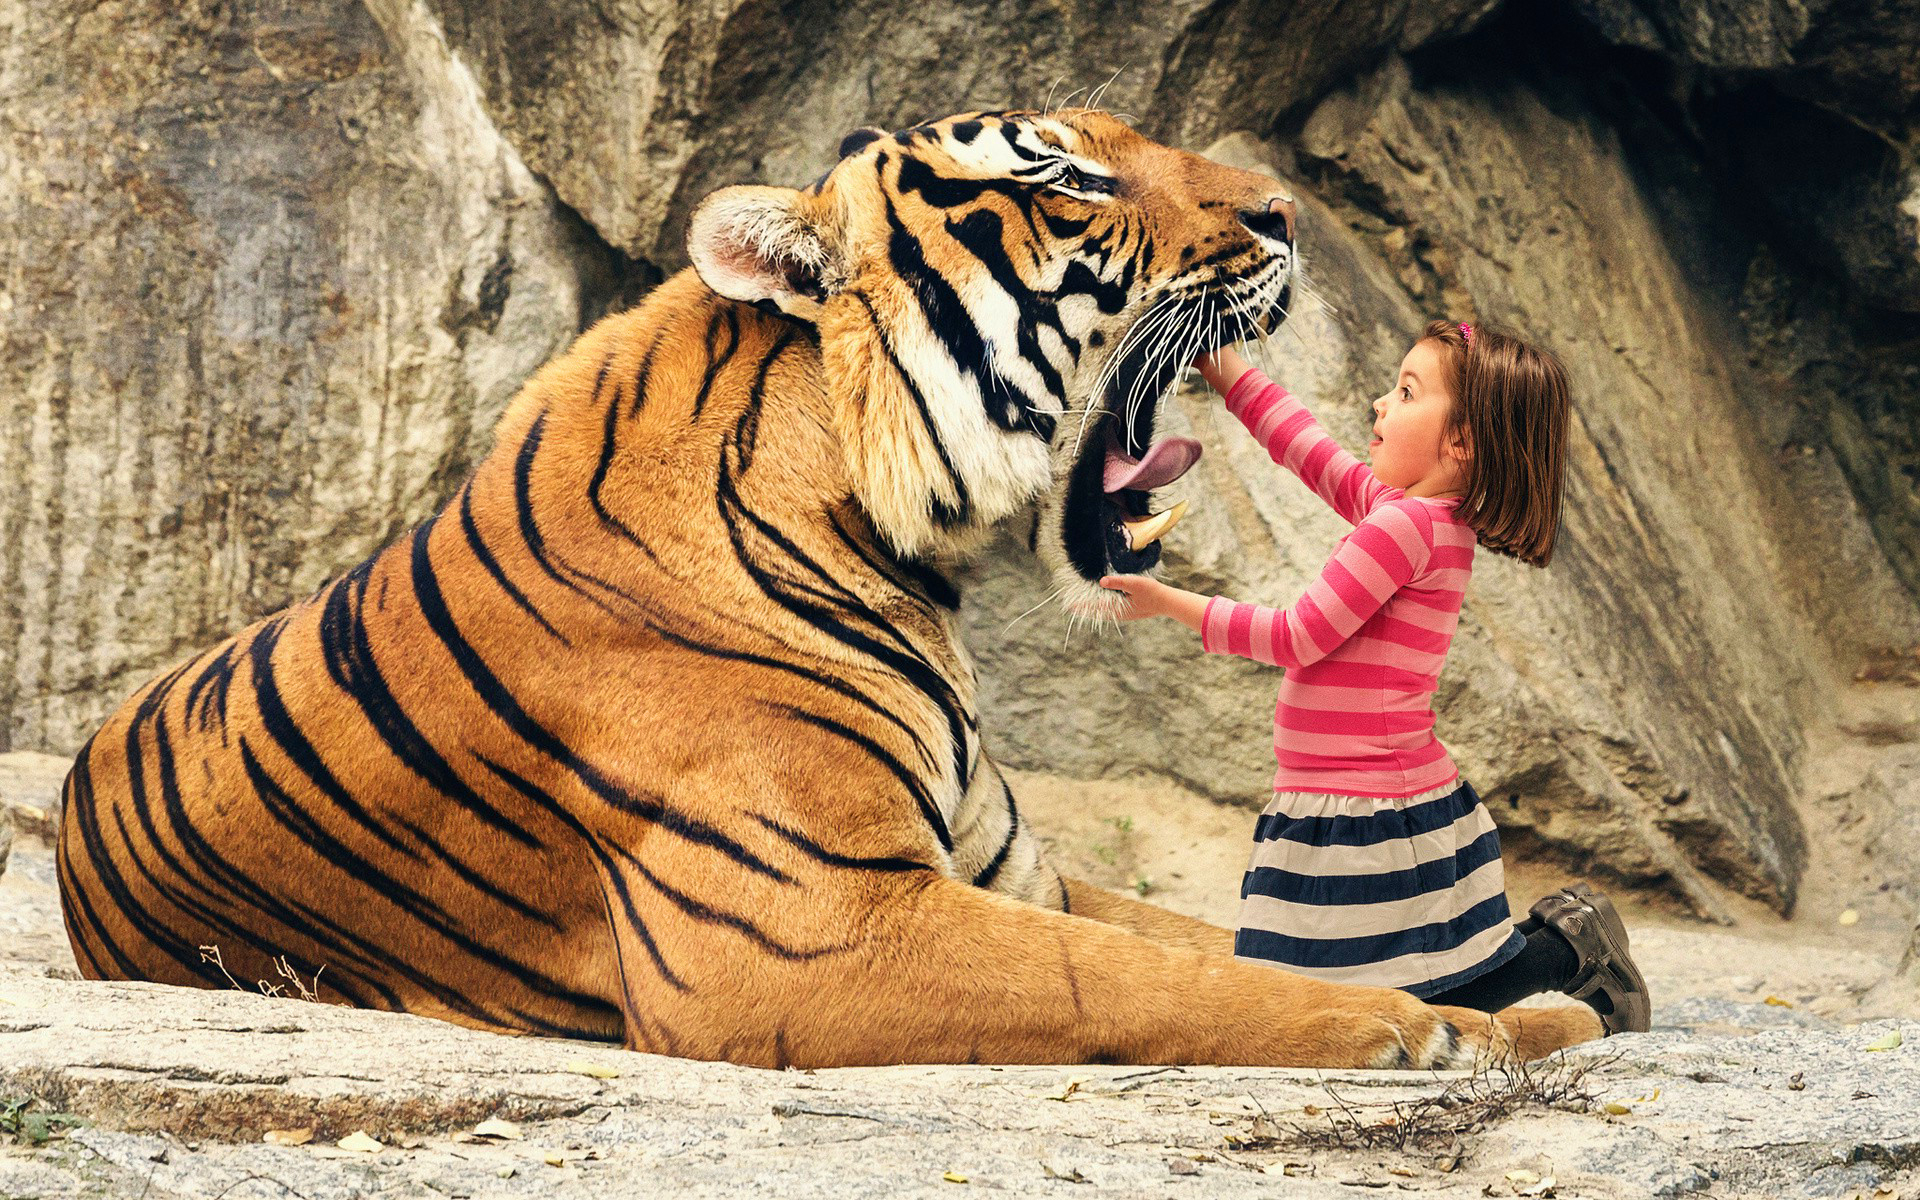 Humor Animals Tiger Open Mouth Muzzles Wild Cat Children Dangerous Photo Manipulation Fangs Striped  1920x1200